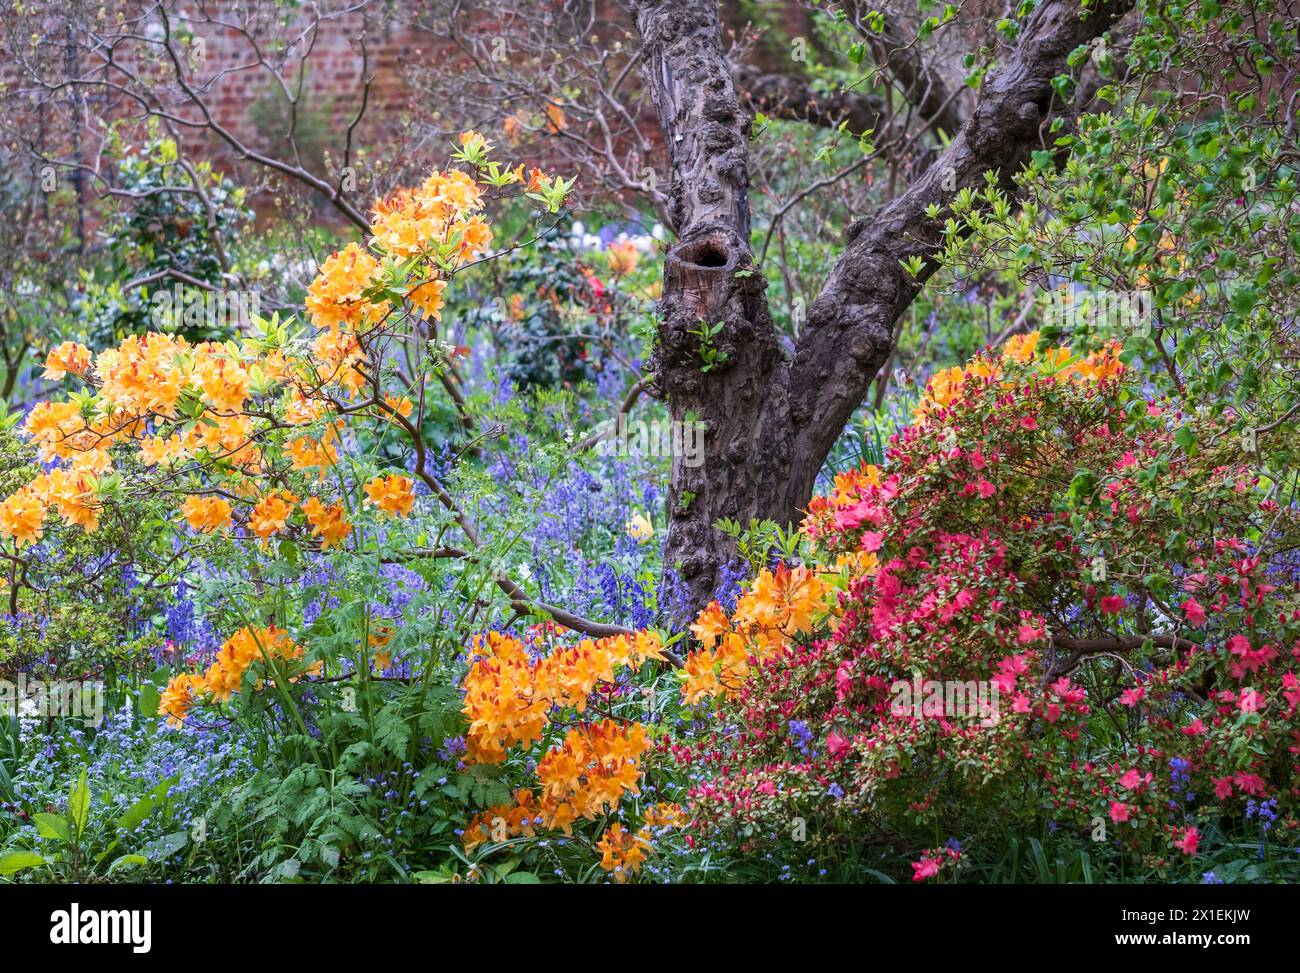 Colourful azalea outside the walled garden at Eastcote House Gardens, with blue bells and blue forget-me-not in the background. Eastcote, London, UK. Stock Photo